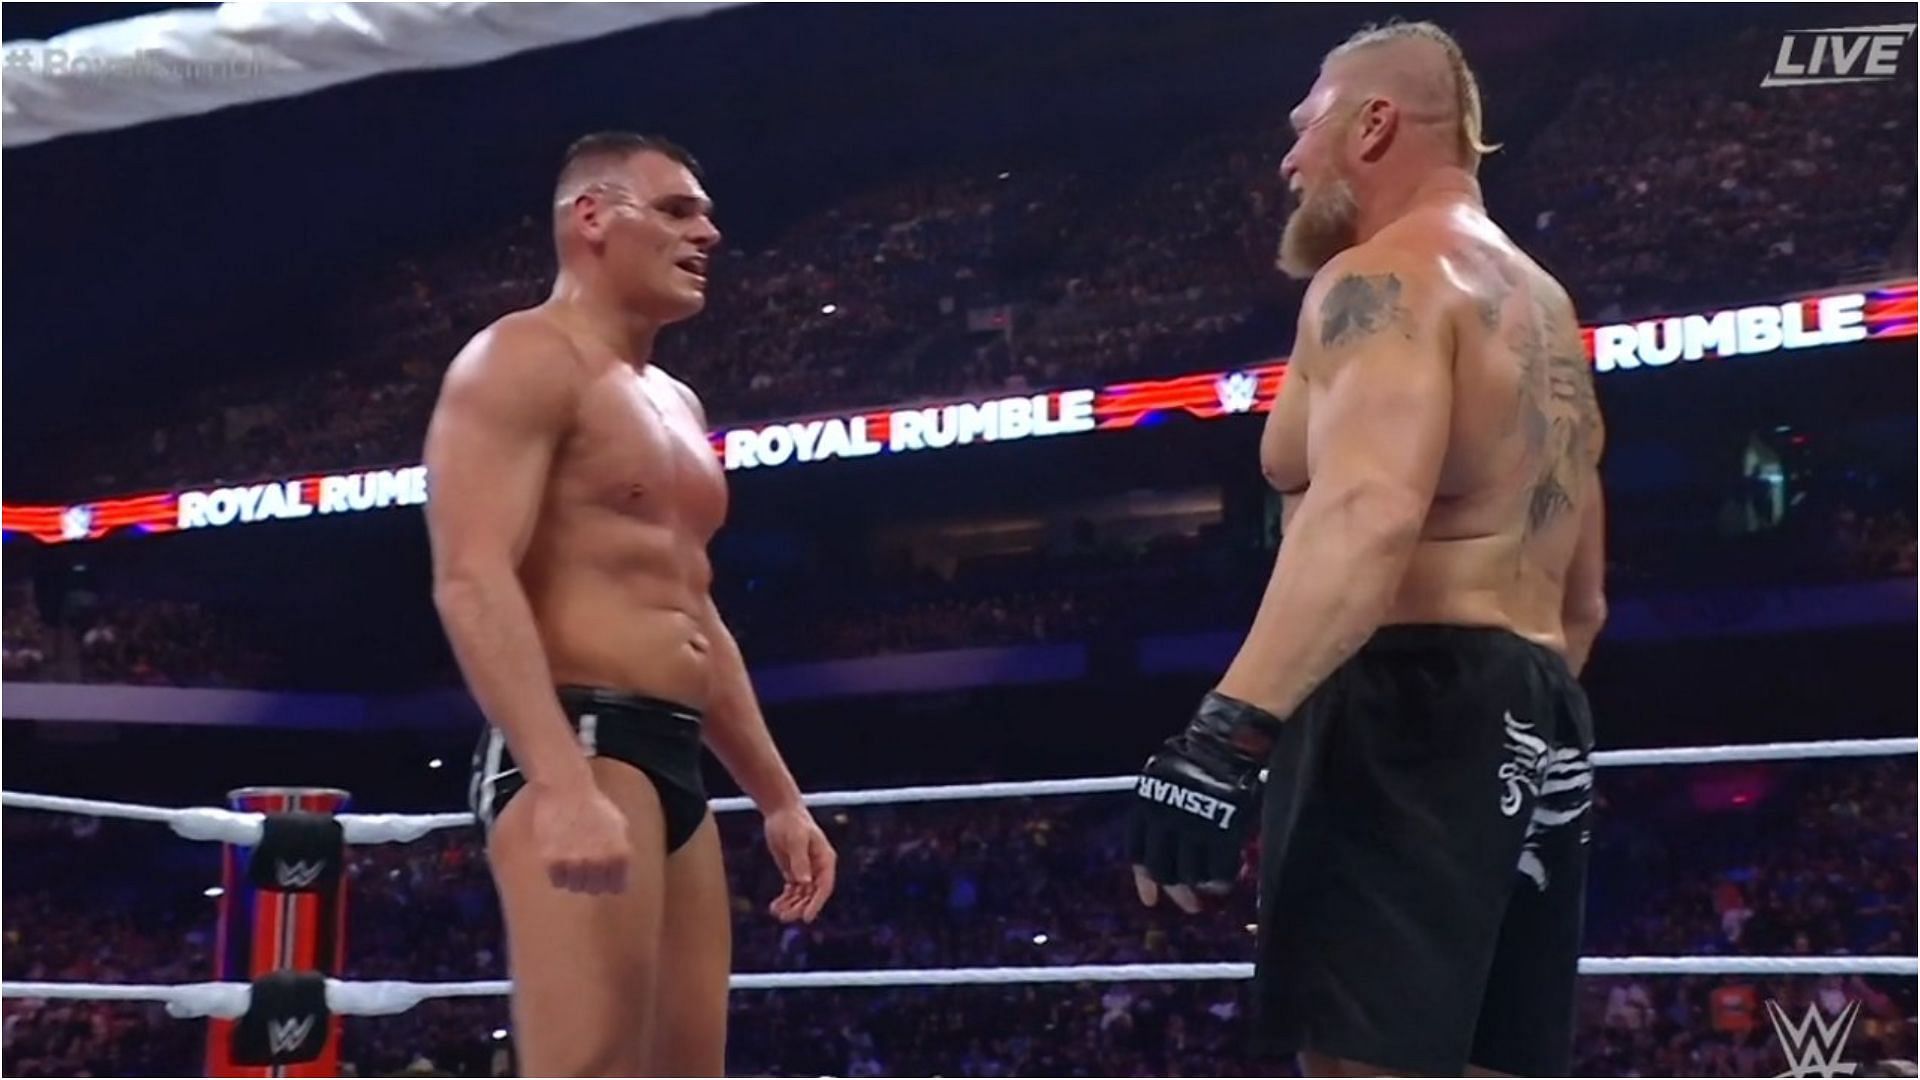 A face off that had the WWE Universe roaring!